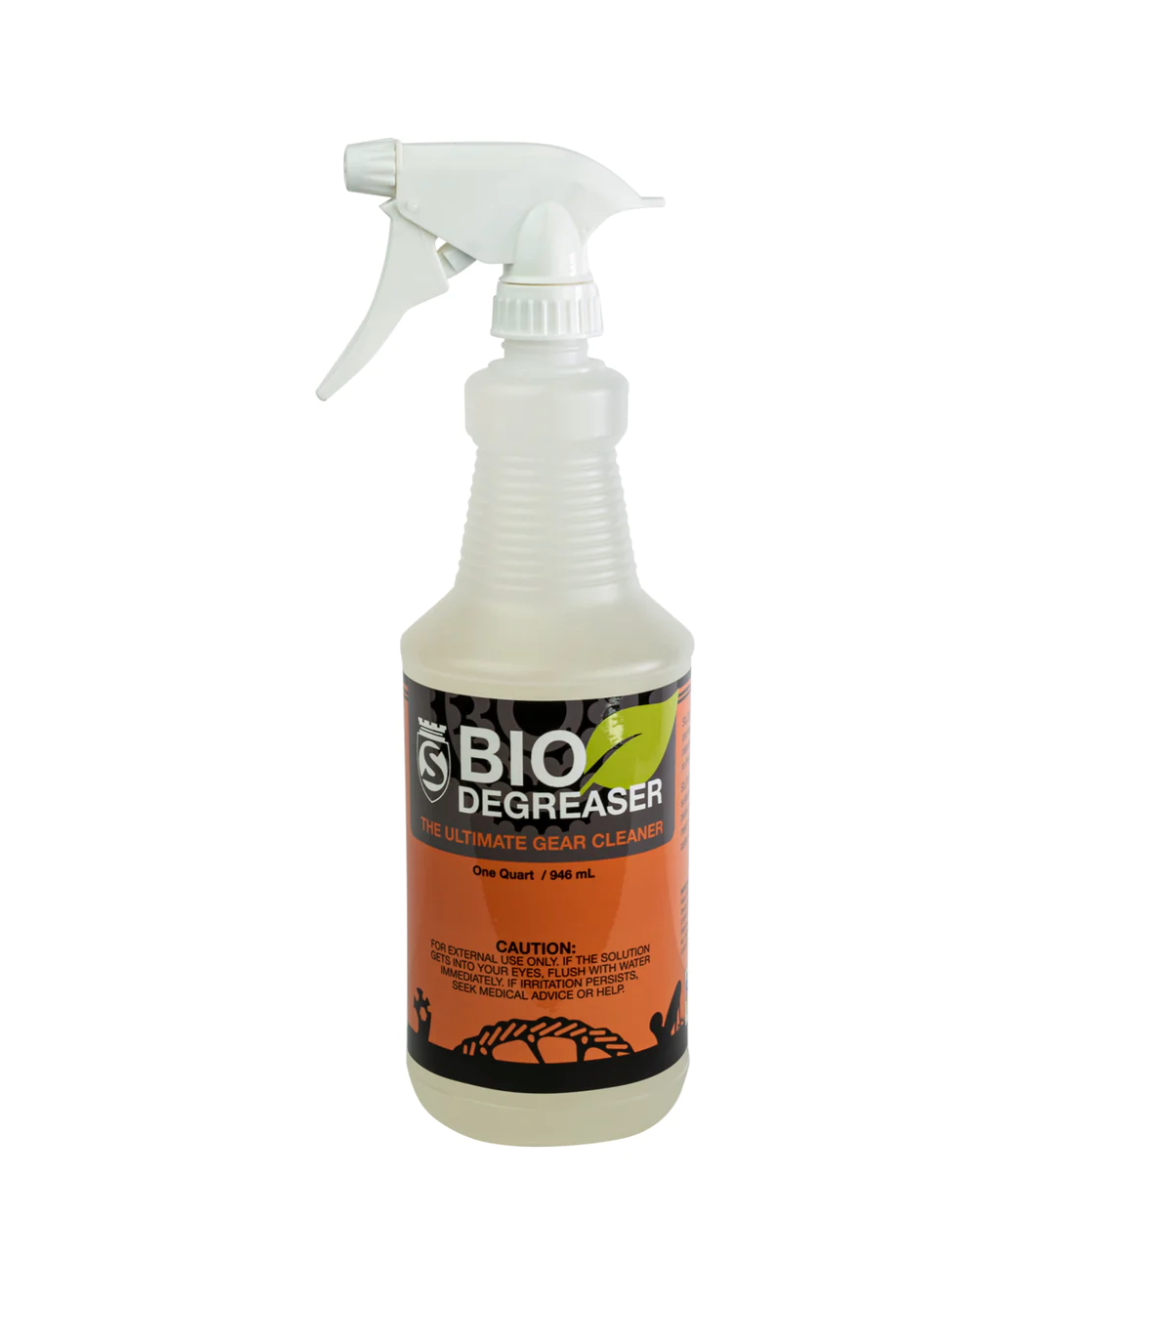 SILCA - Bicycle Bio degreaser